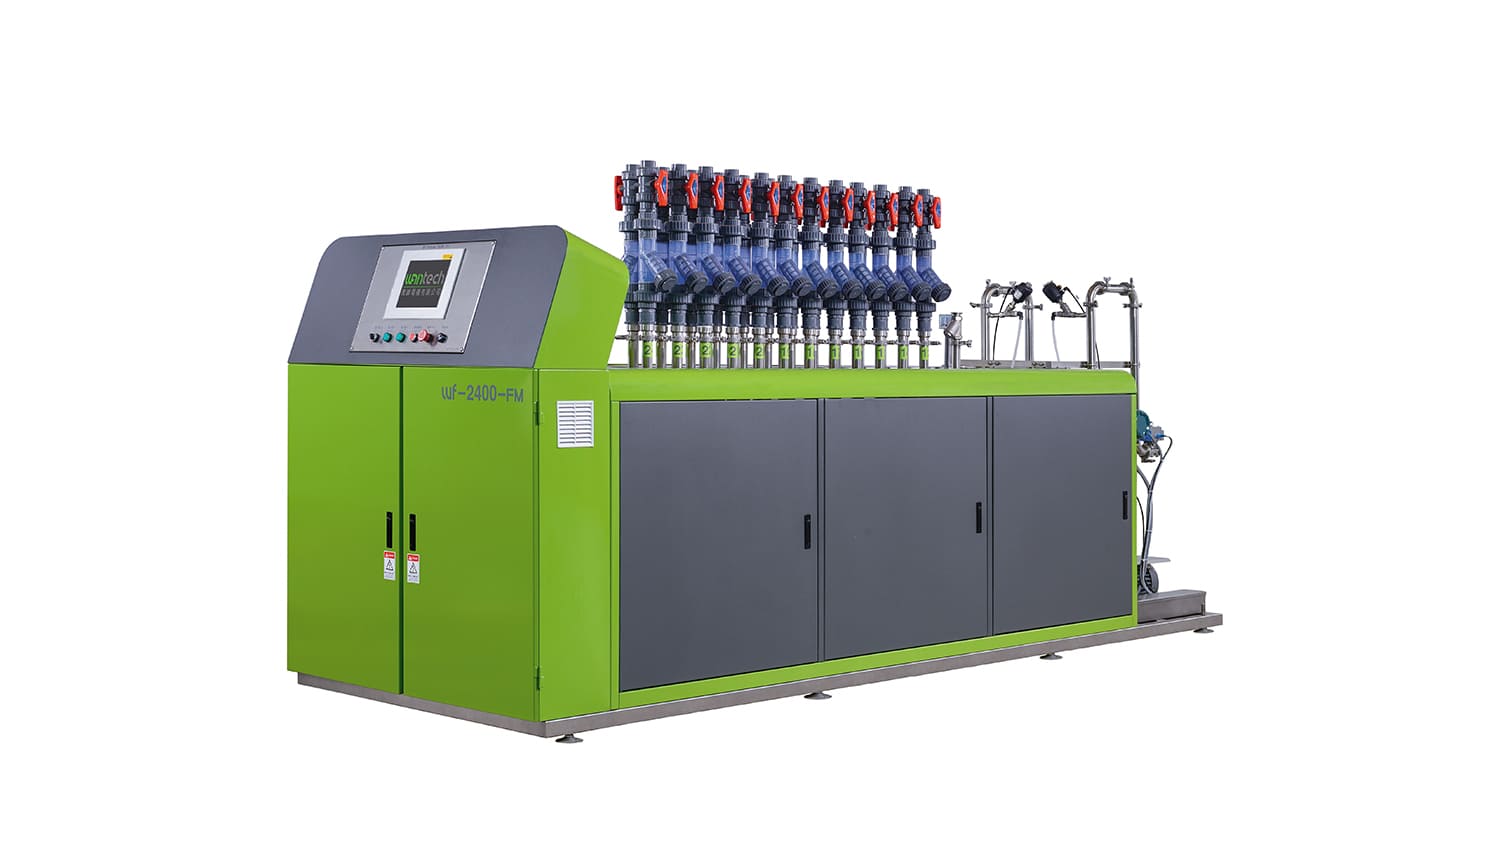 WF-2400-FM Mass Flowmeter Type Dyeing Liquid Chemical Auto Dispensing and DIstribution System